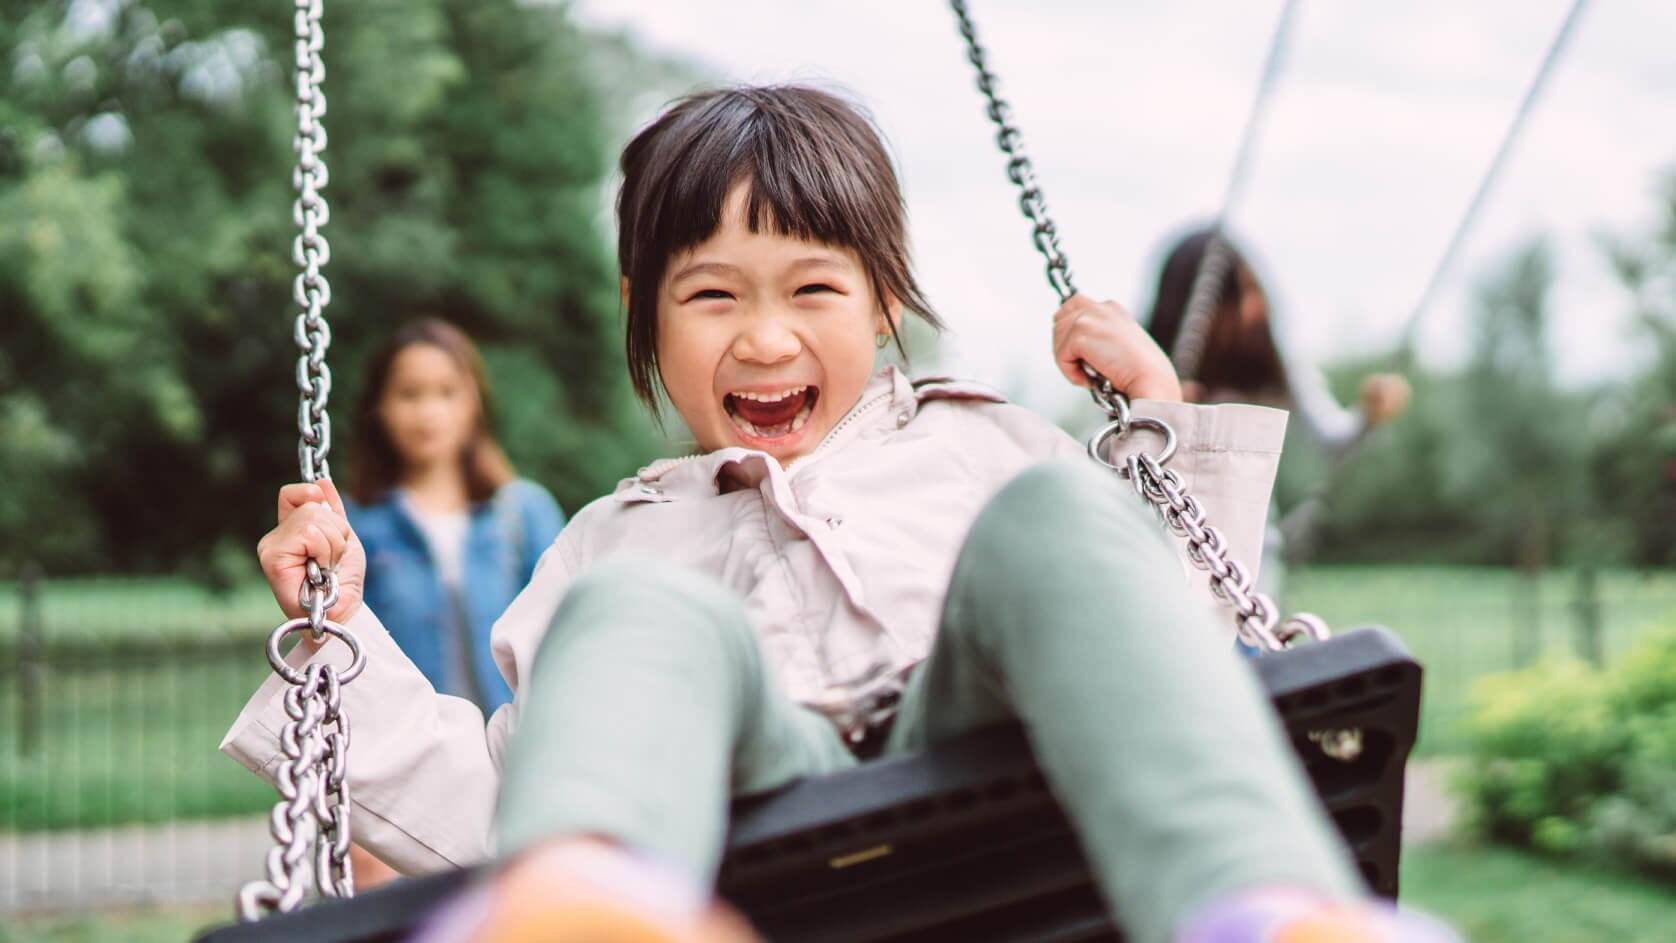 A child laughs while being pushed by her mother on a swing